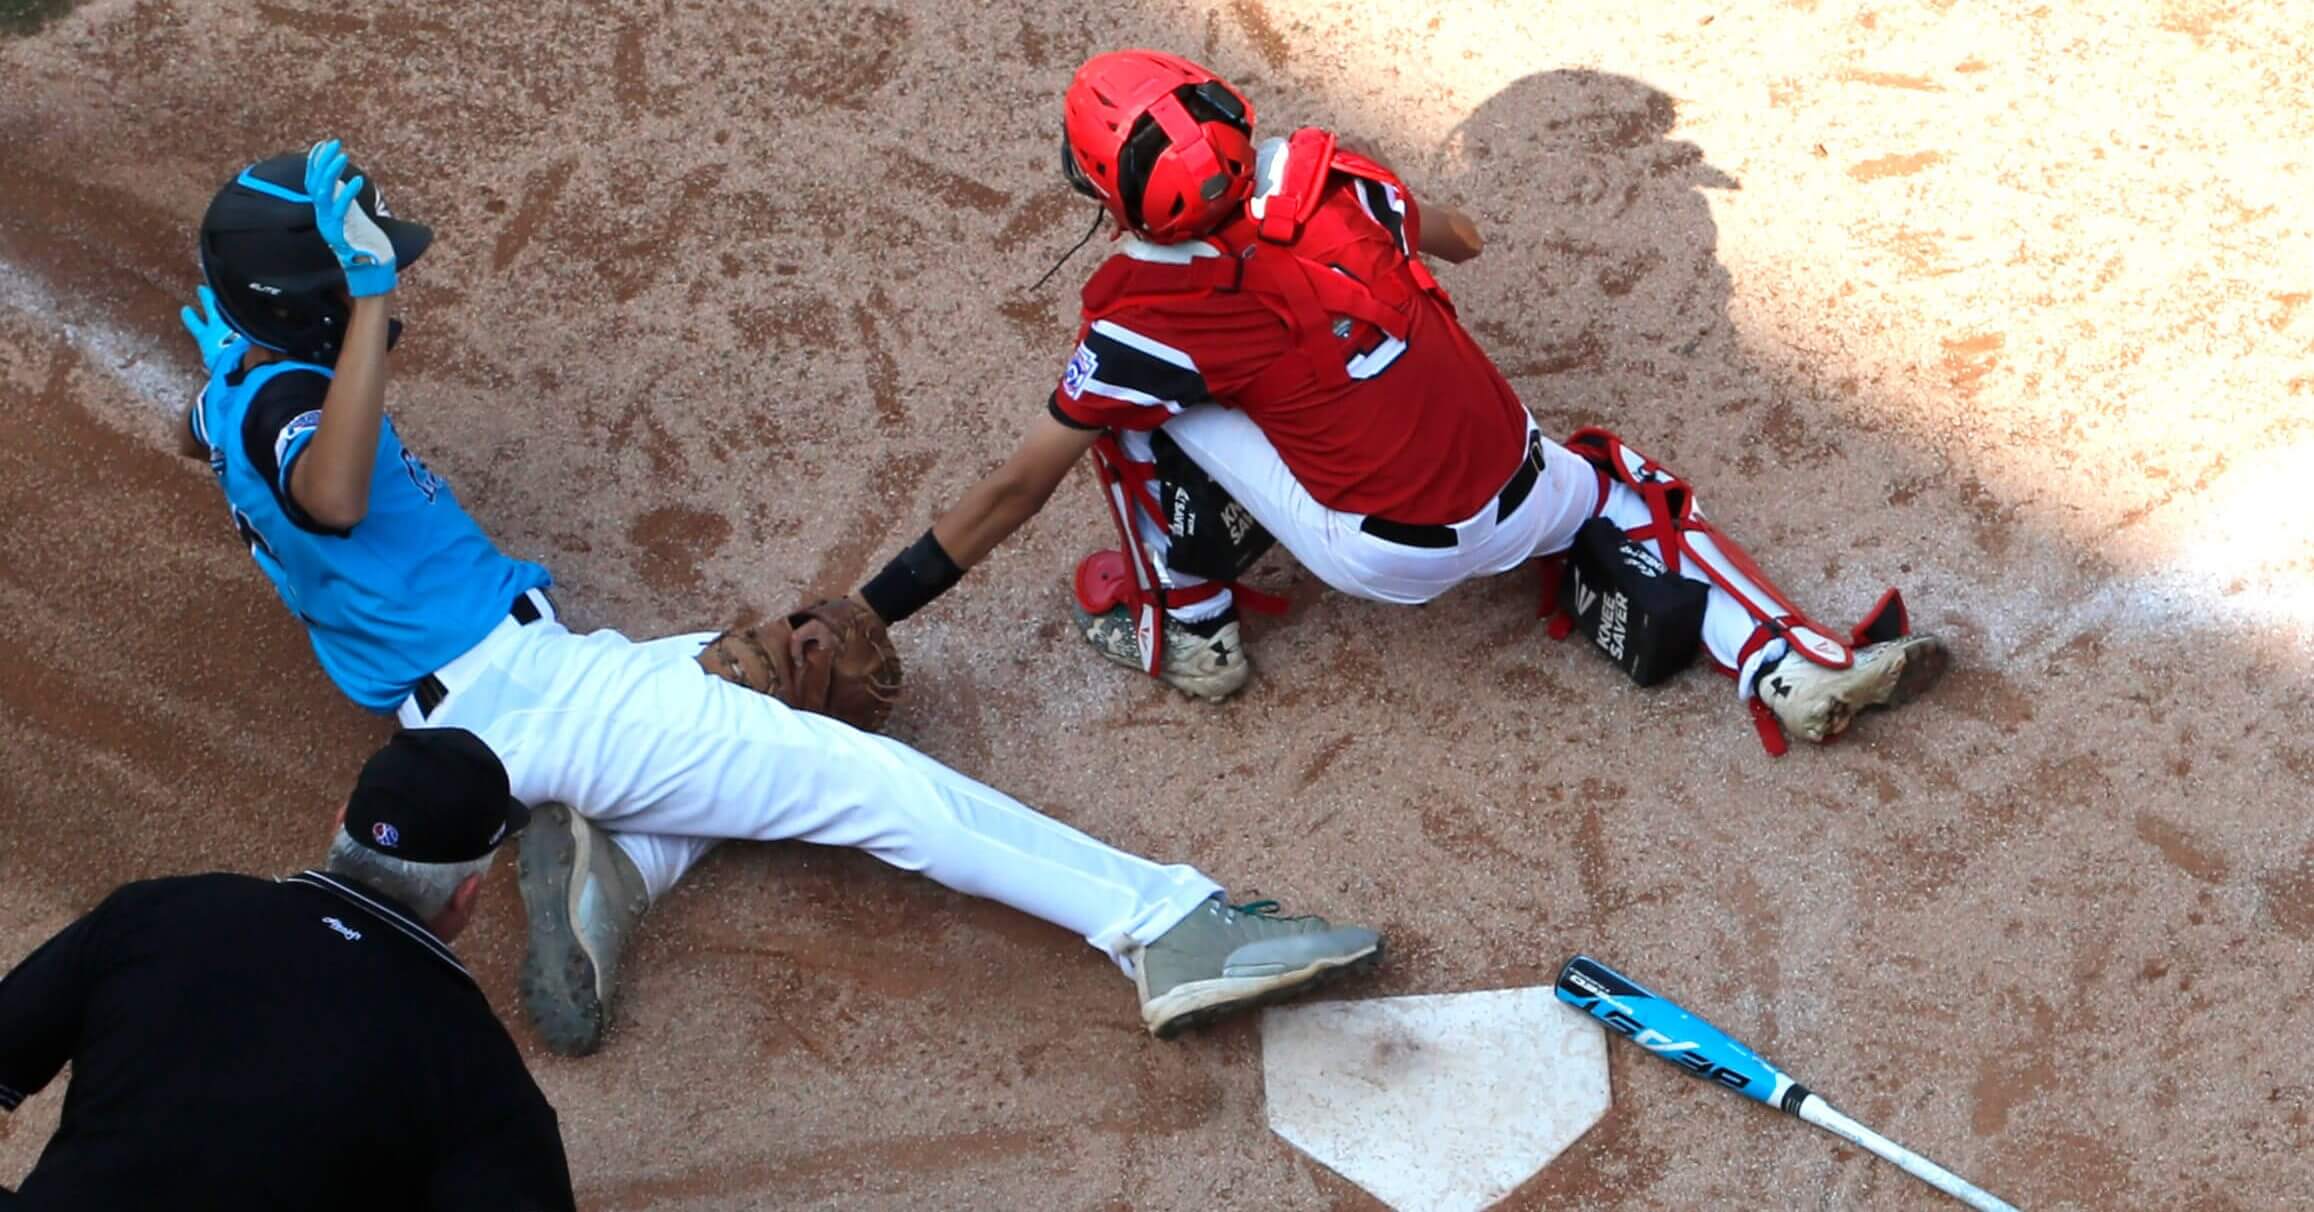 Canada catcher Andre Juco tags out Puerto Rico's Carlos De Jesus (17) at home during the fourth inning of Little League World Series baseball tournament game in South Williamsport, Pa., on Wednesday.